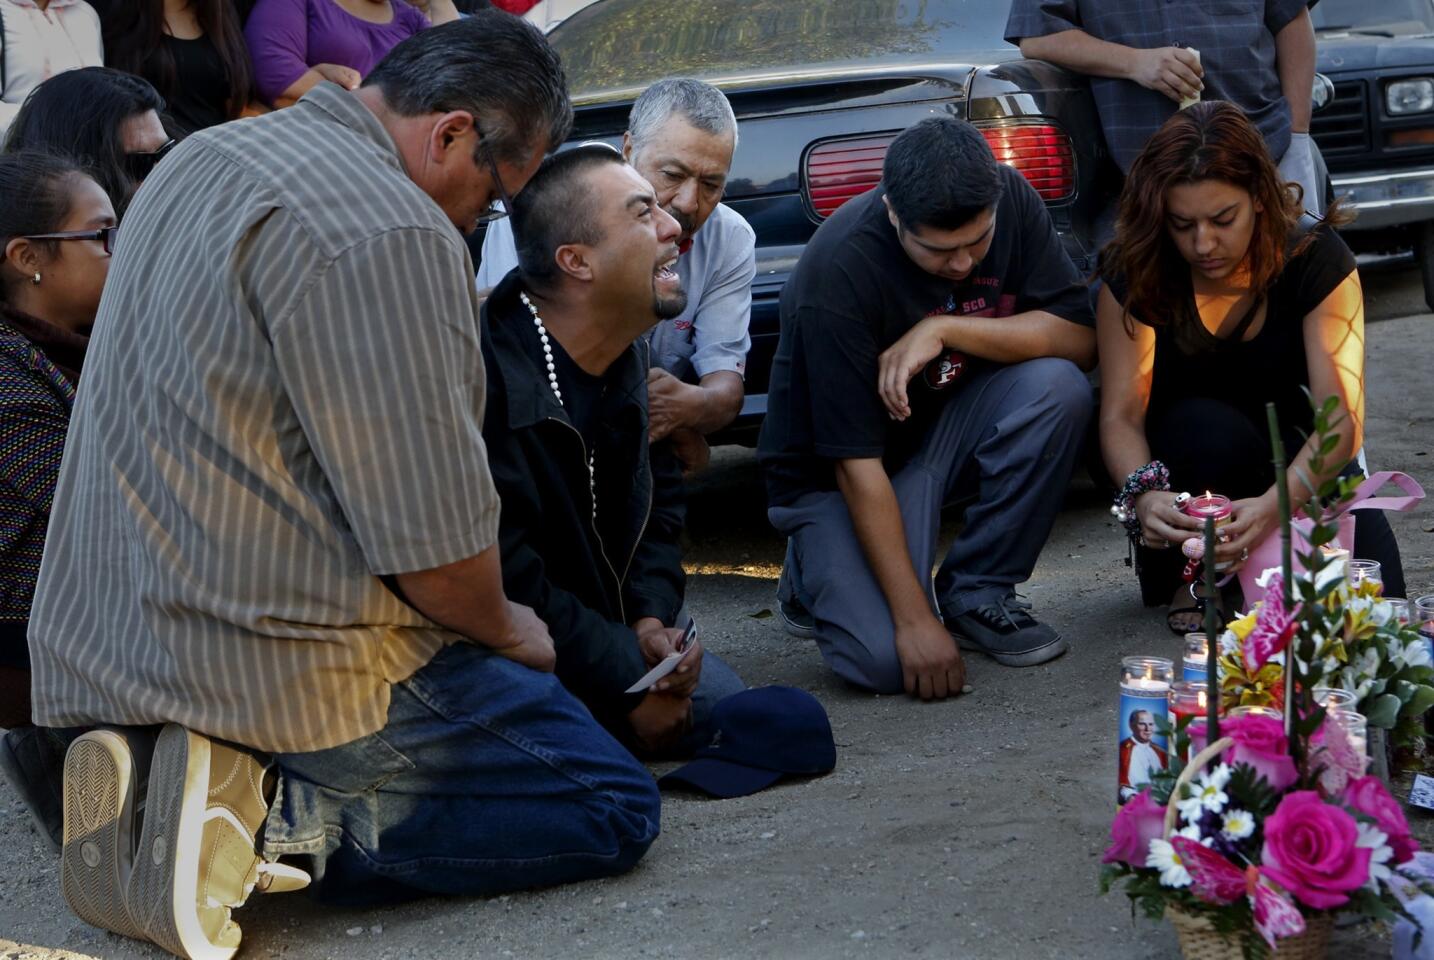 Rudy Coronado, center, grieves at a vigil for his young daughters, who were allegedly killed by their mother.